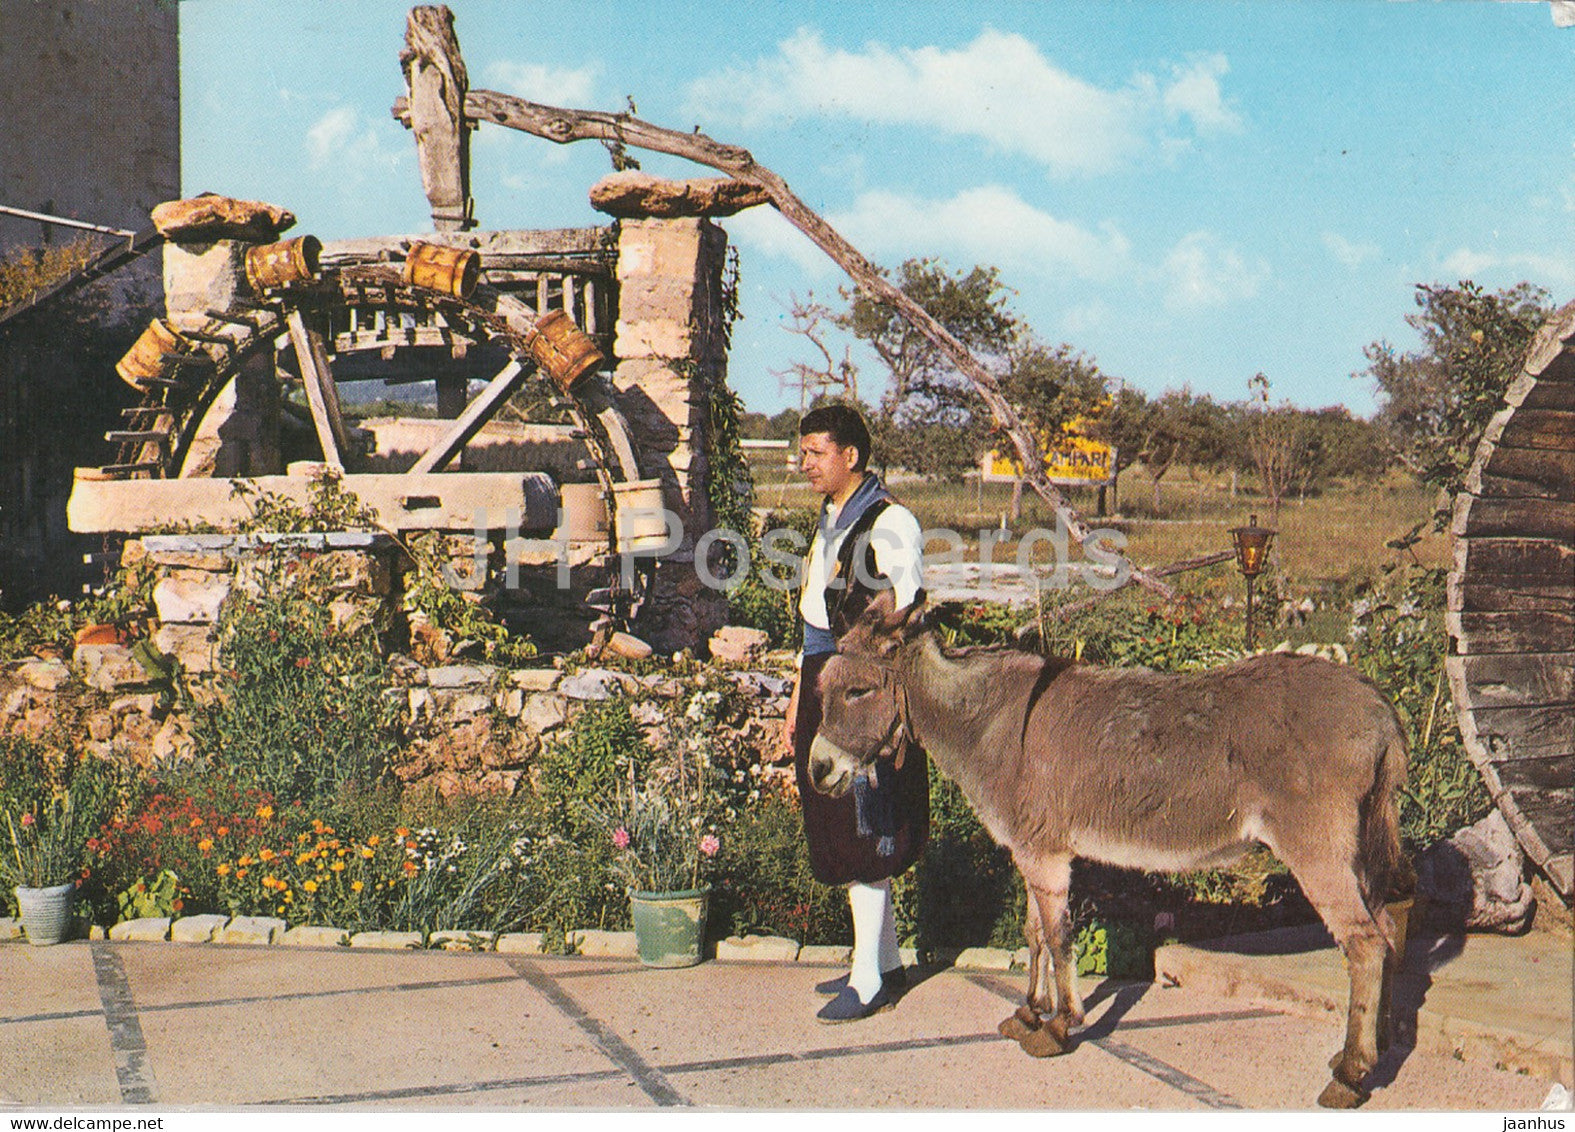 Mallorca - Noria tipica - Typical Noria - donkey - animals - folk costumes - 47 - 1978 - Spain - used - JH Postcards